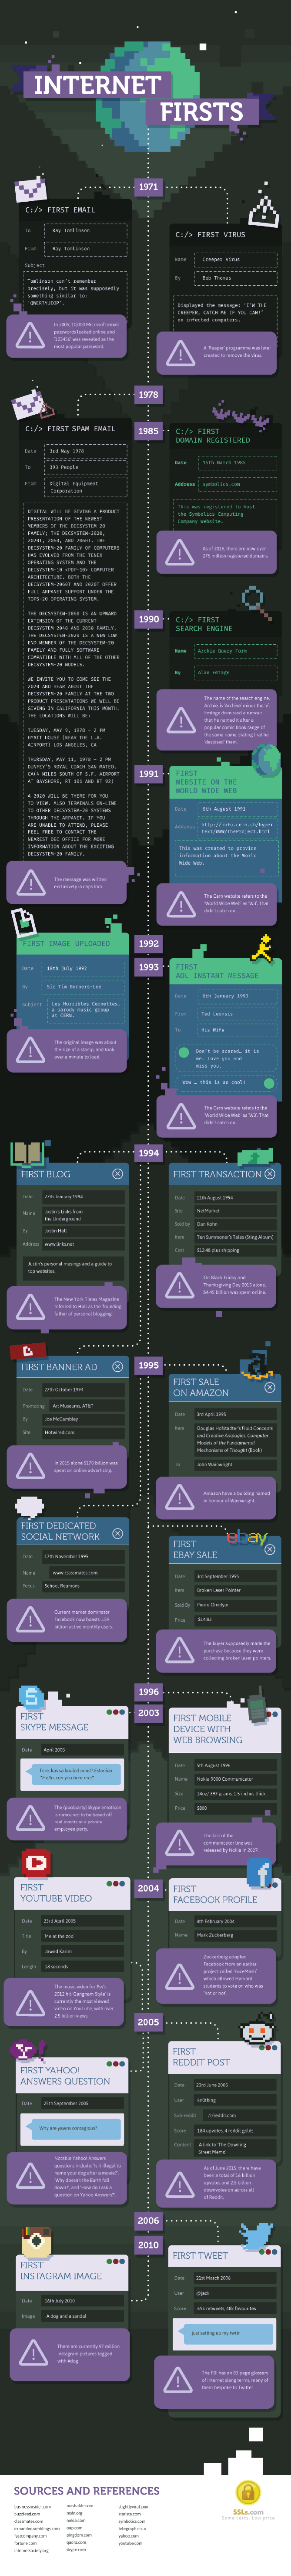 internet-firsts-infographic.png